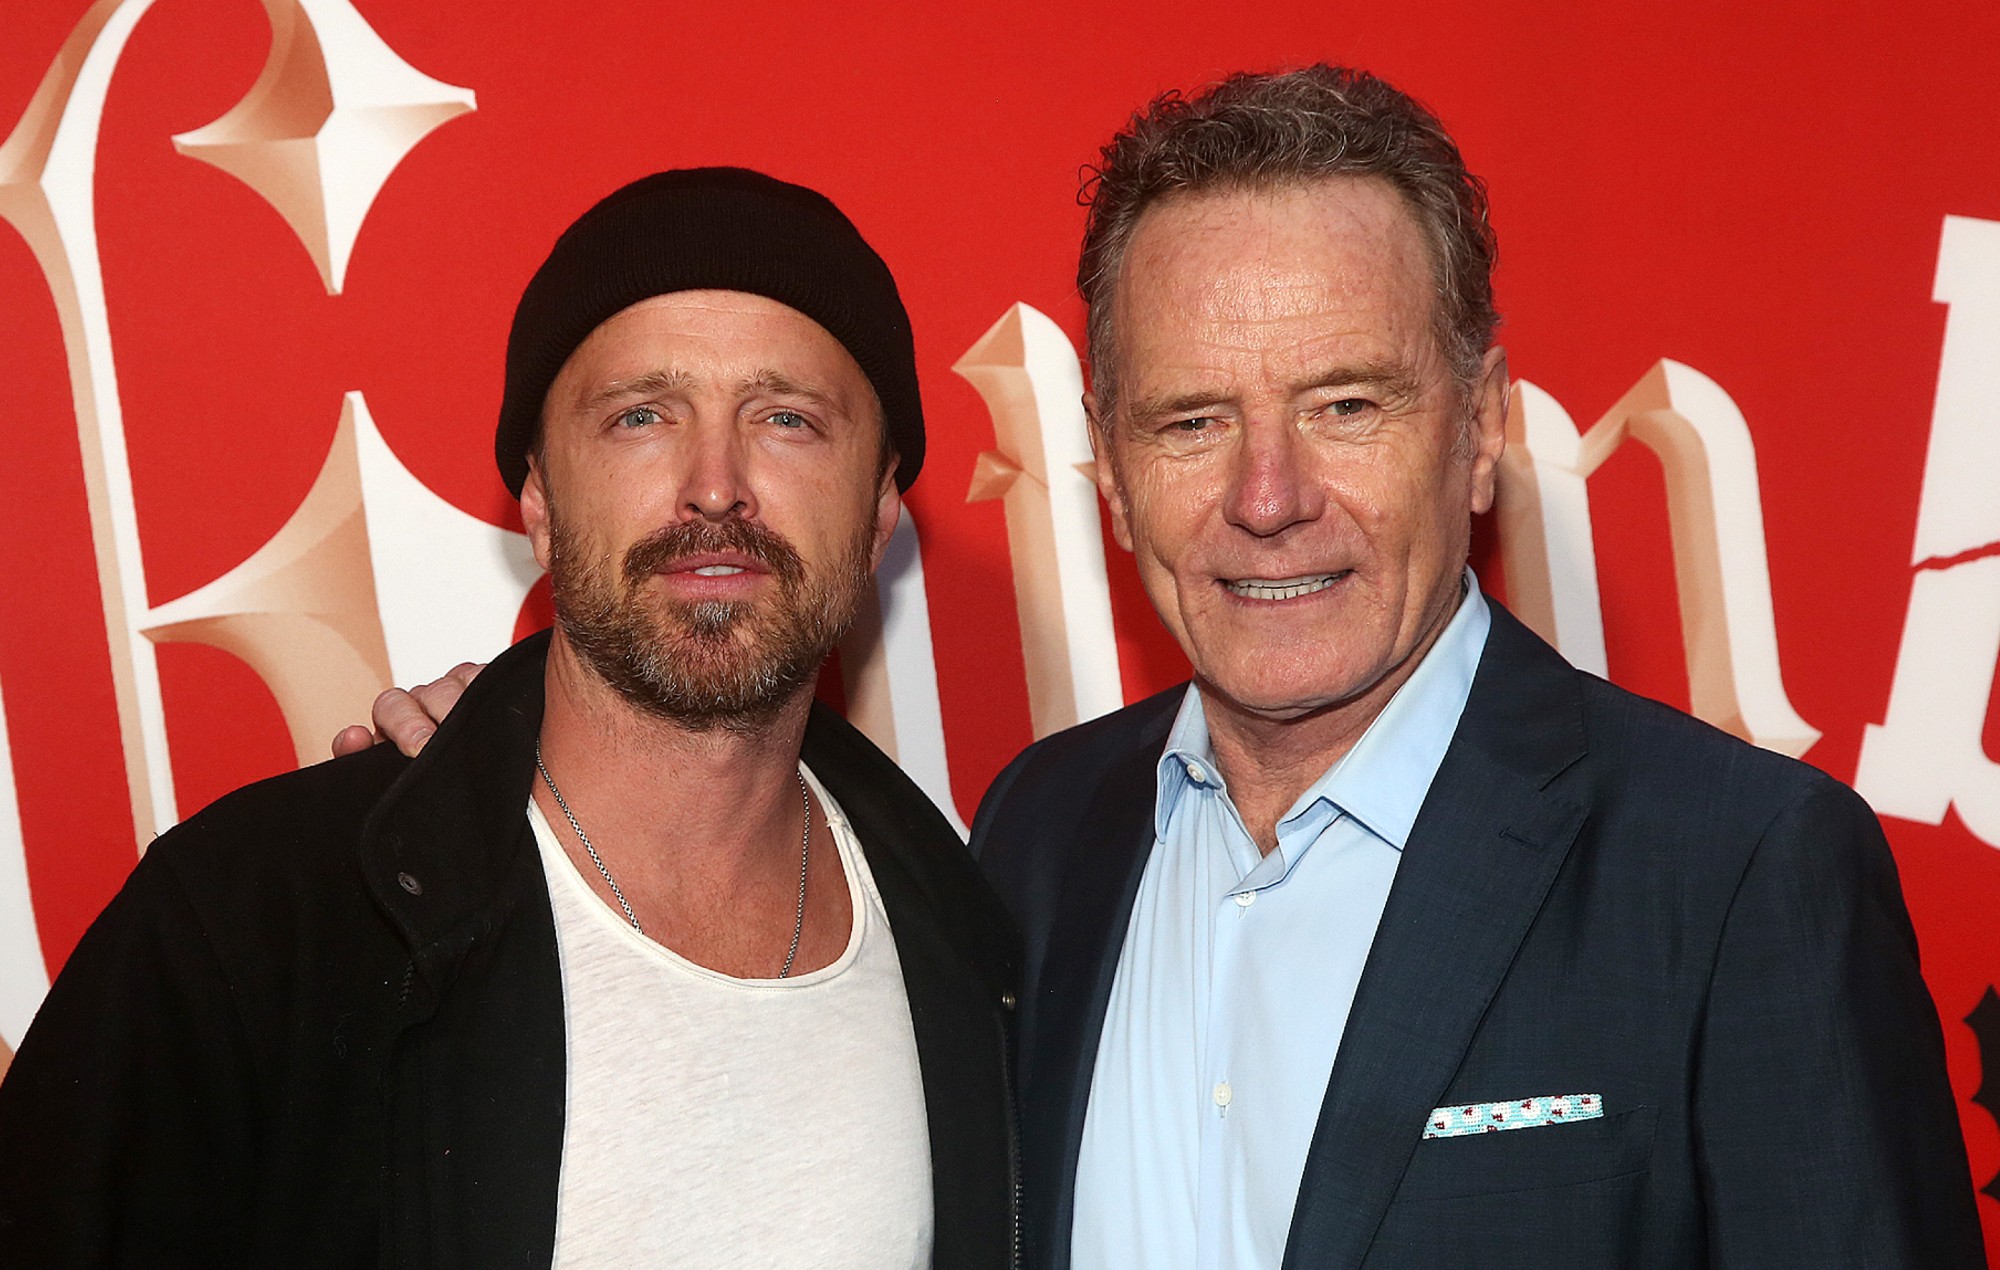 Bryan Cranston and Aaron Paul served drinks at Drake’s birthday party